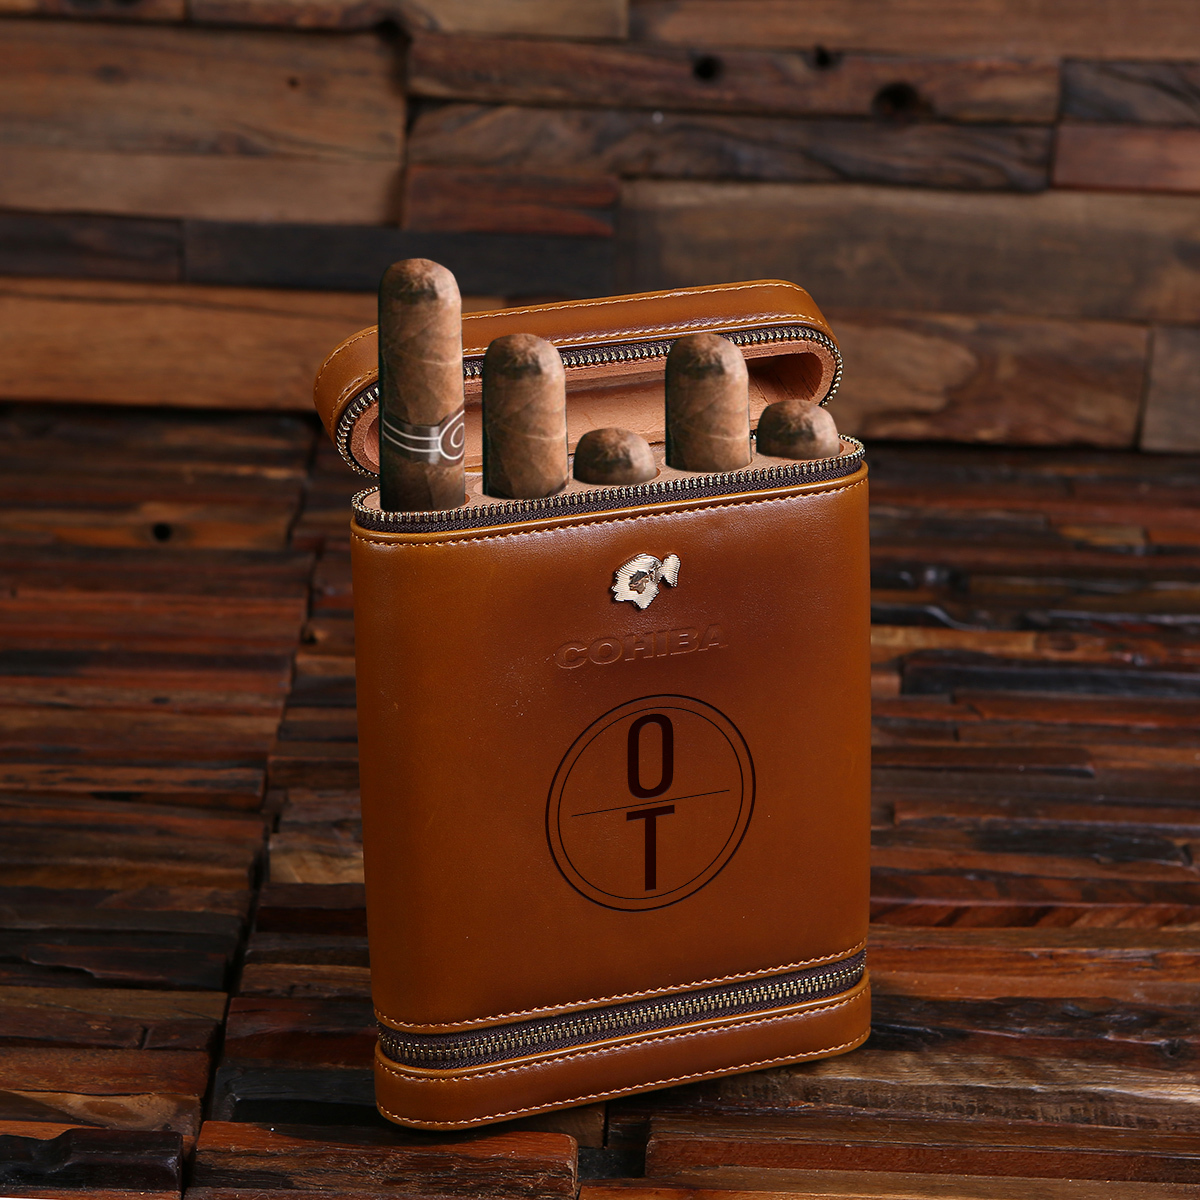 The Guat Cohiba Leather Cigar Holder TP-027848